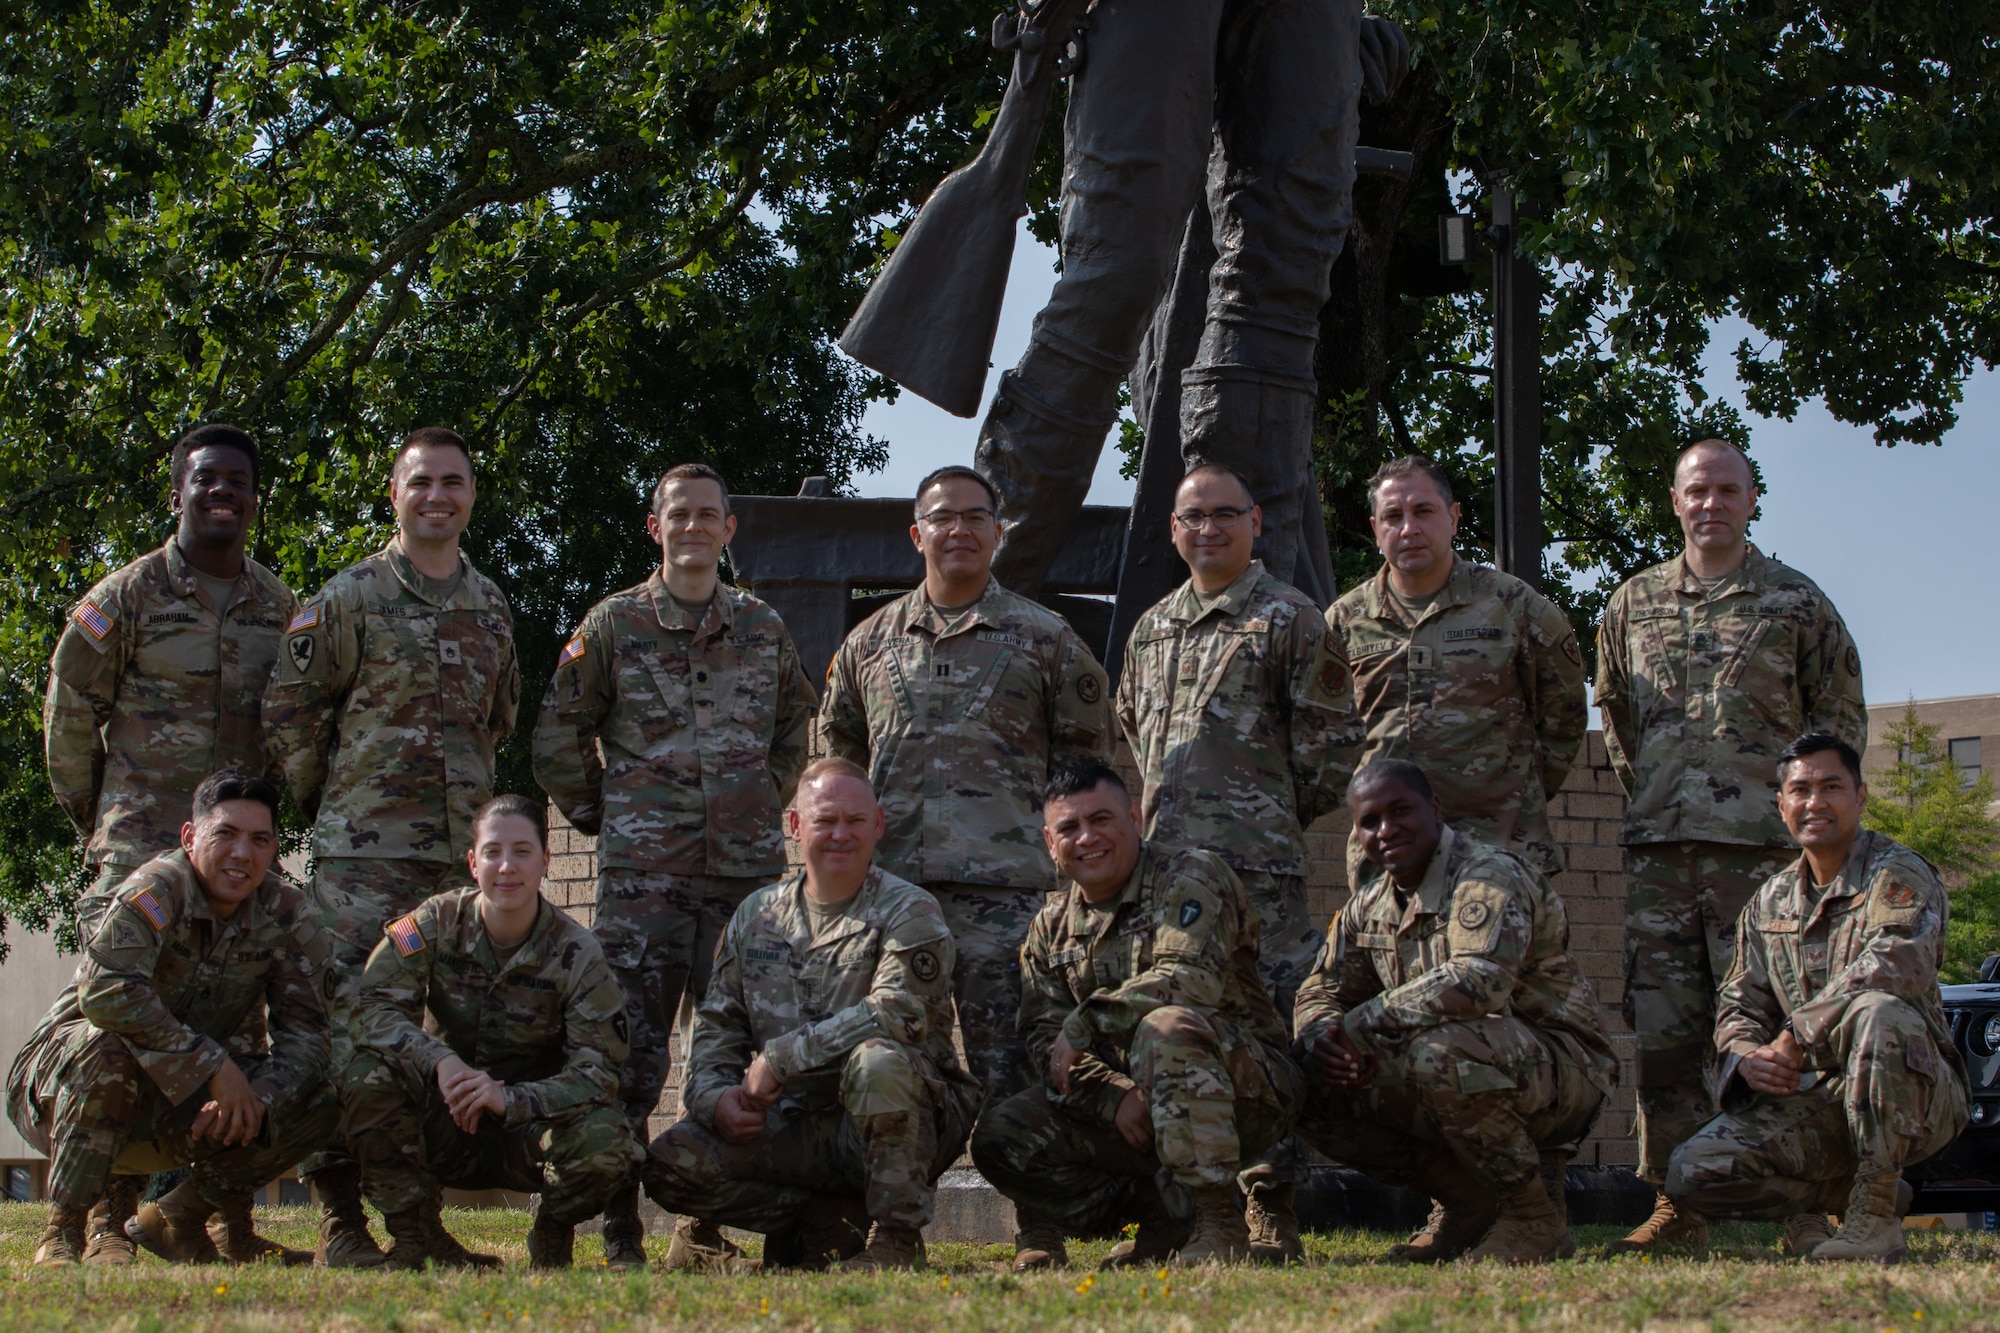 Texas National Guardsmen participating in Cyber Shield 2023 pose for a group photo in front of the Minuteman statue at the Professional Educational Center, Little Rock, Ark., June 8, 2023. Approximately 800 National Guard and Army Reserve Soldiers, Airmen, Sailors, and civilian cyber professionals from around the world attended this year’s Cyber Shield training exercise.